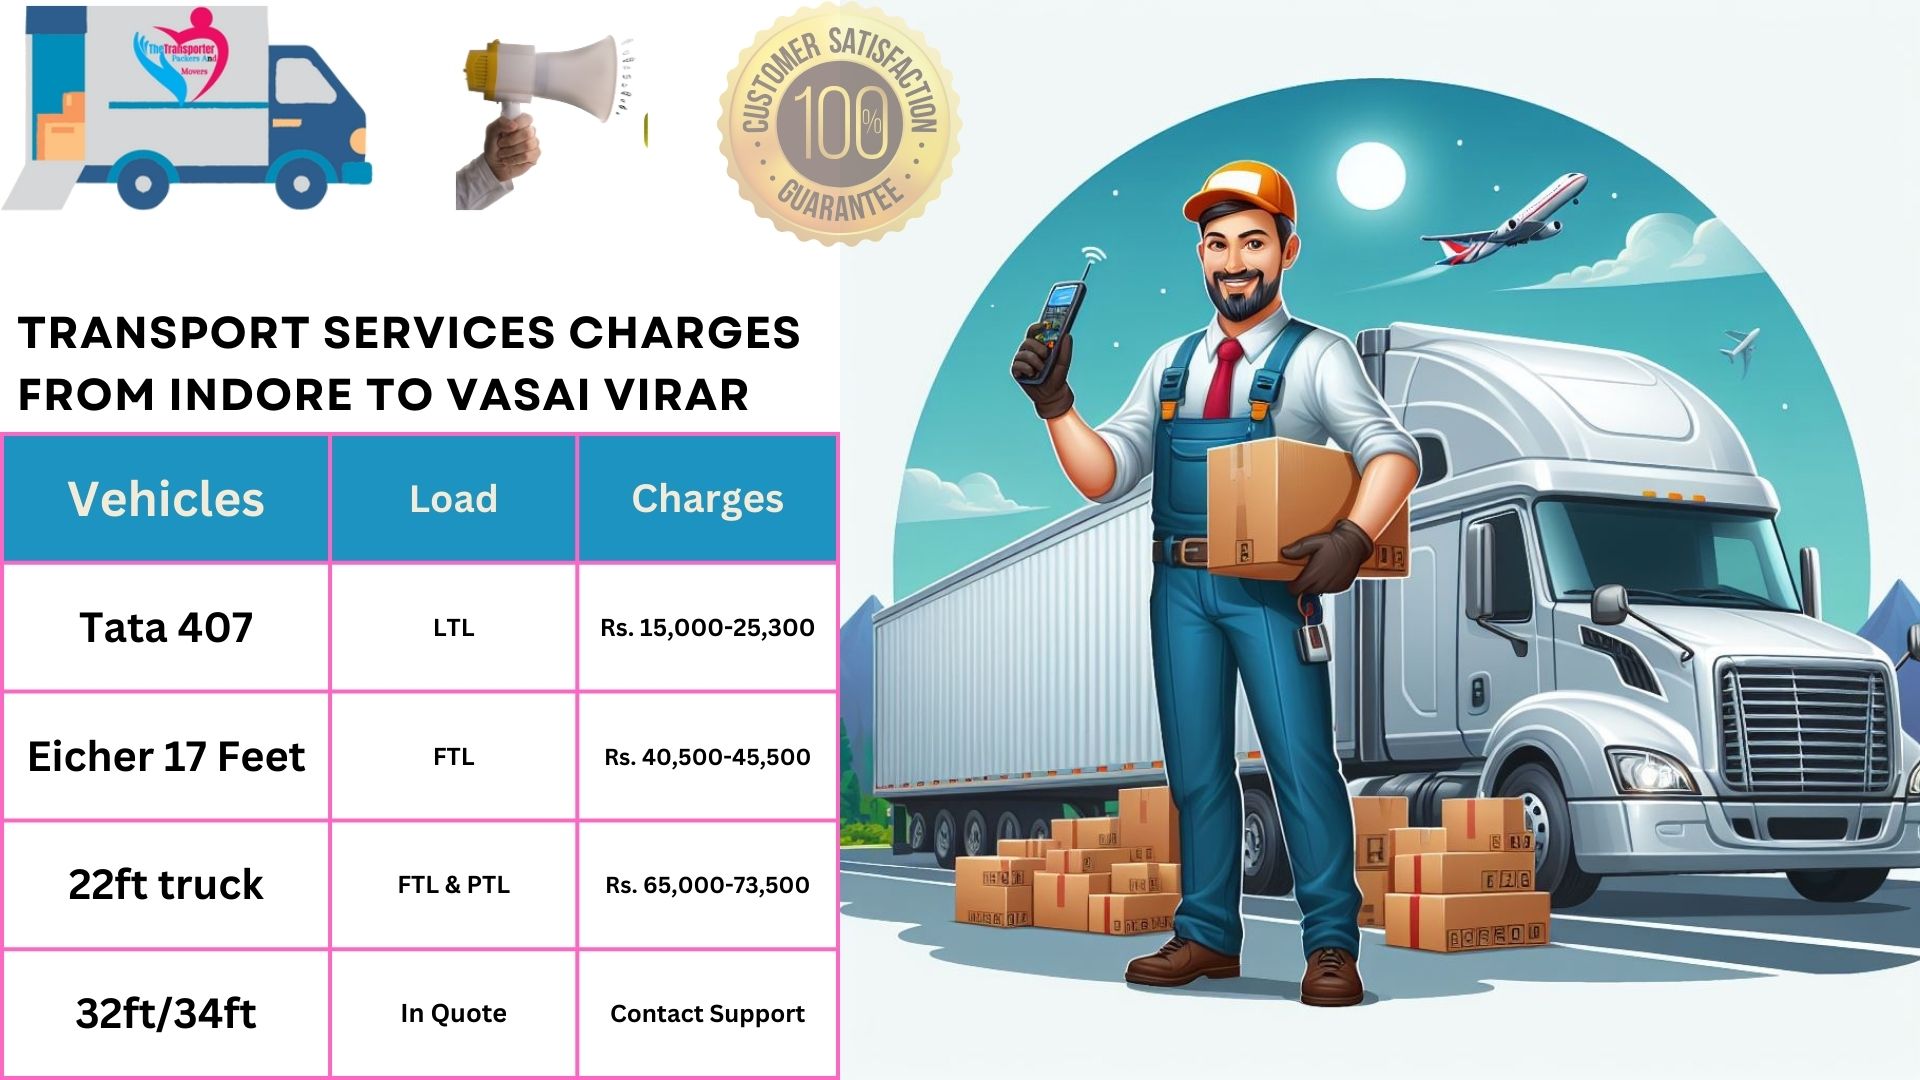 Your household goods shifting from Indore to Vasai Virar